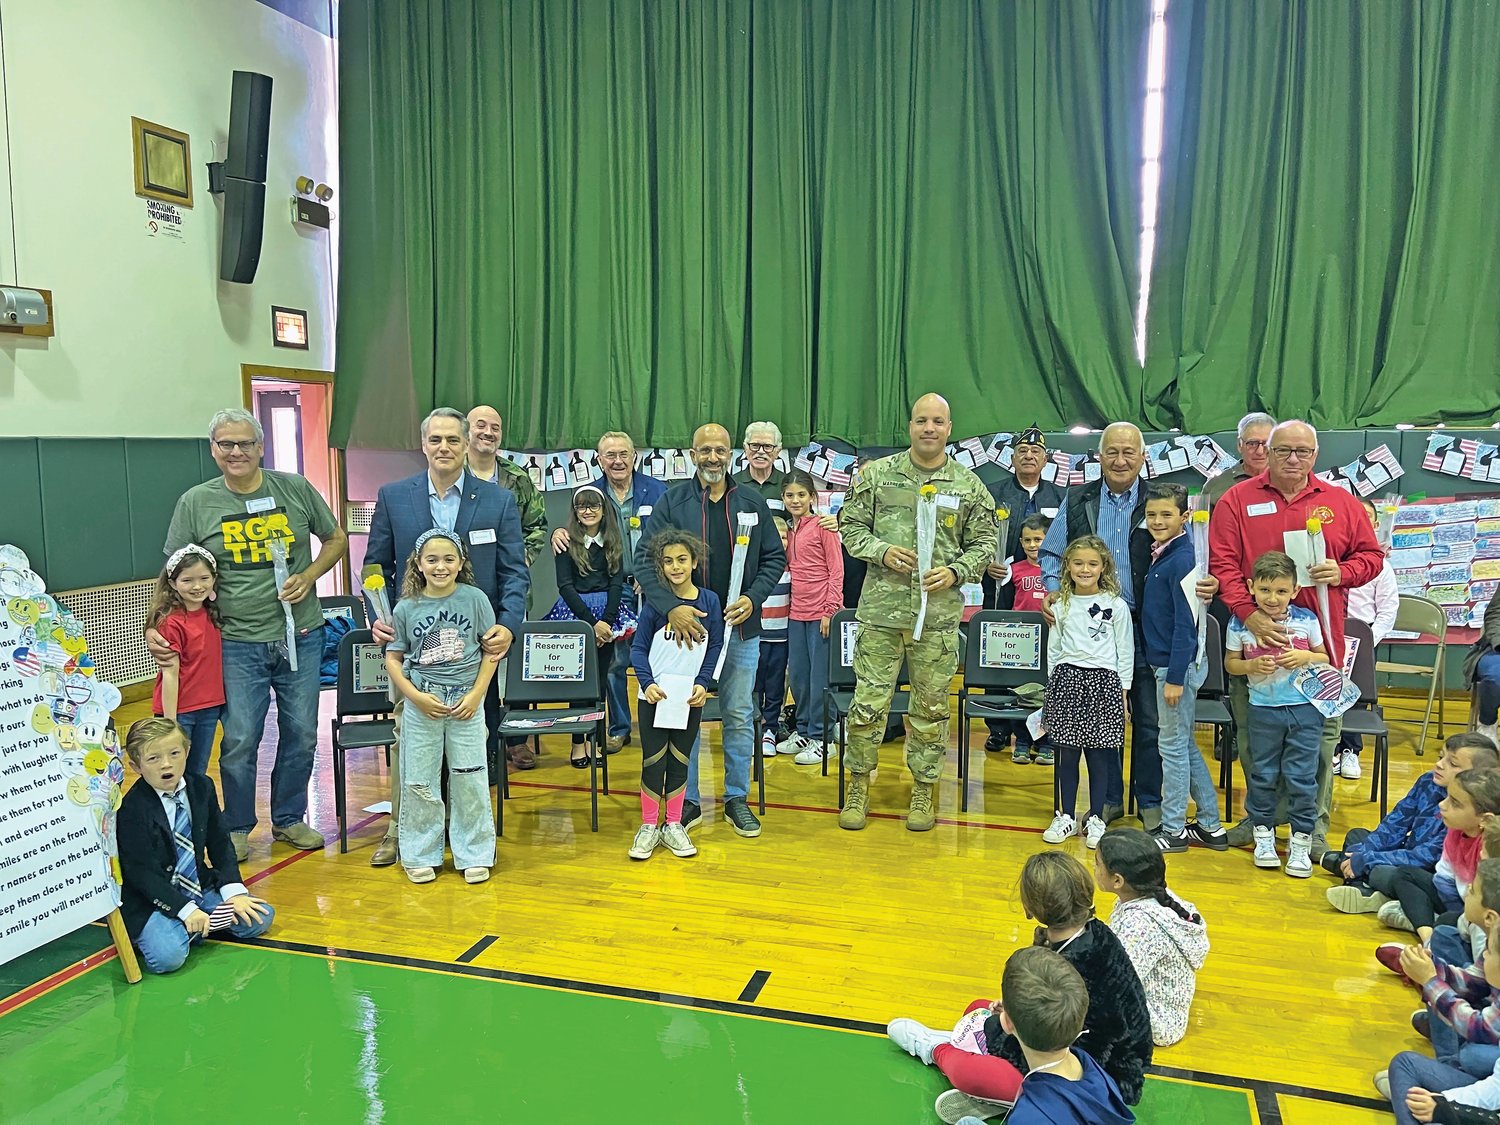 Waverly Park Elementary School students honored their family members who served in the US Armed Forces by bring them to school as part “Bring a Veteran to School Day.”